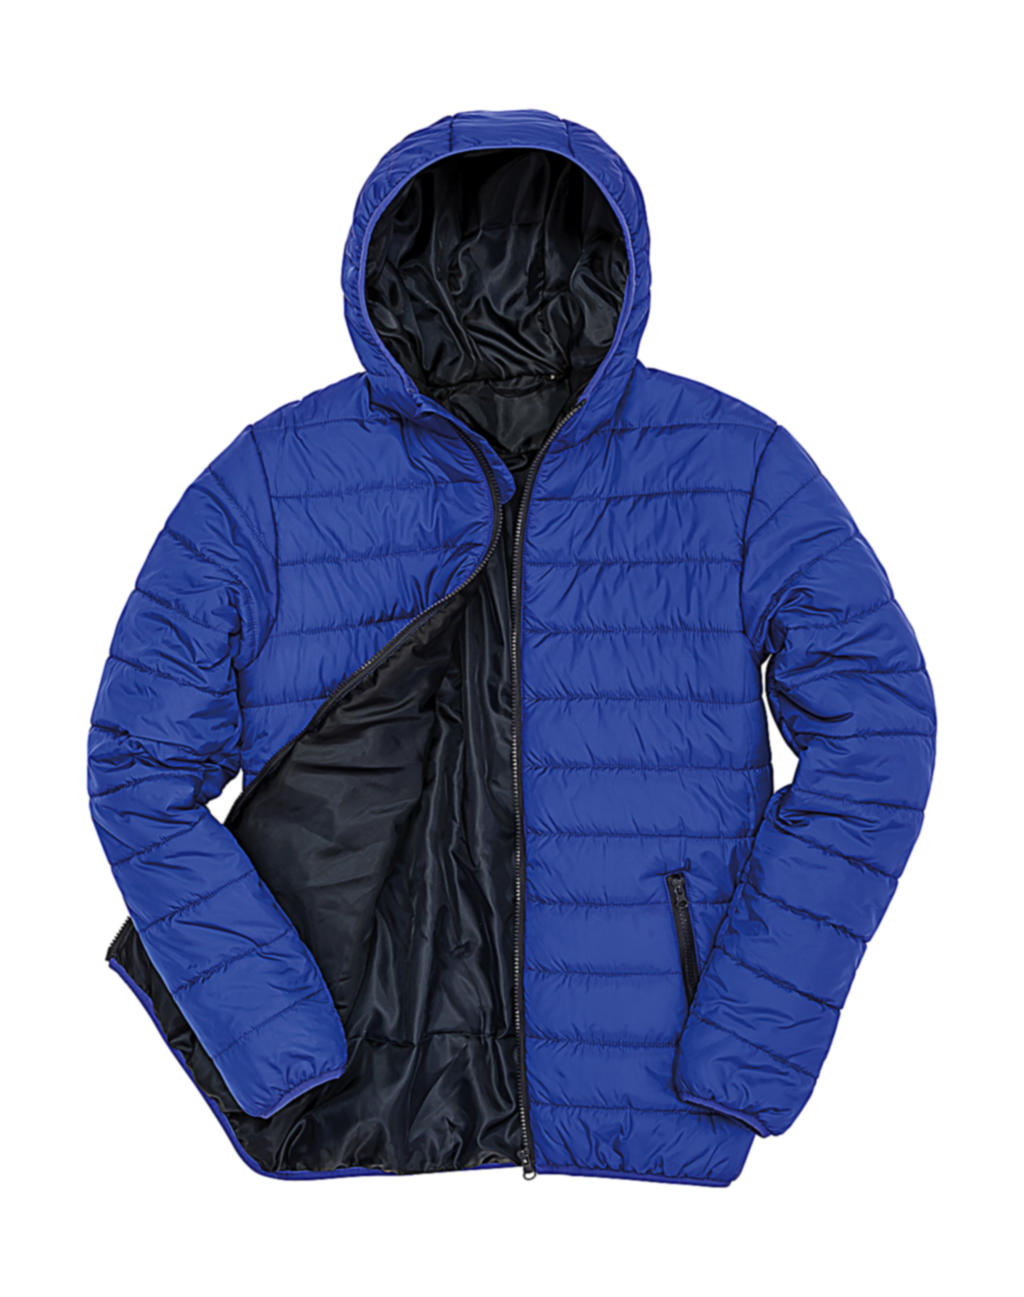  Soft Padded Jacket in Farbe Royal/Navy